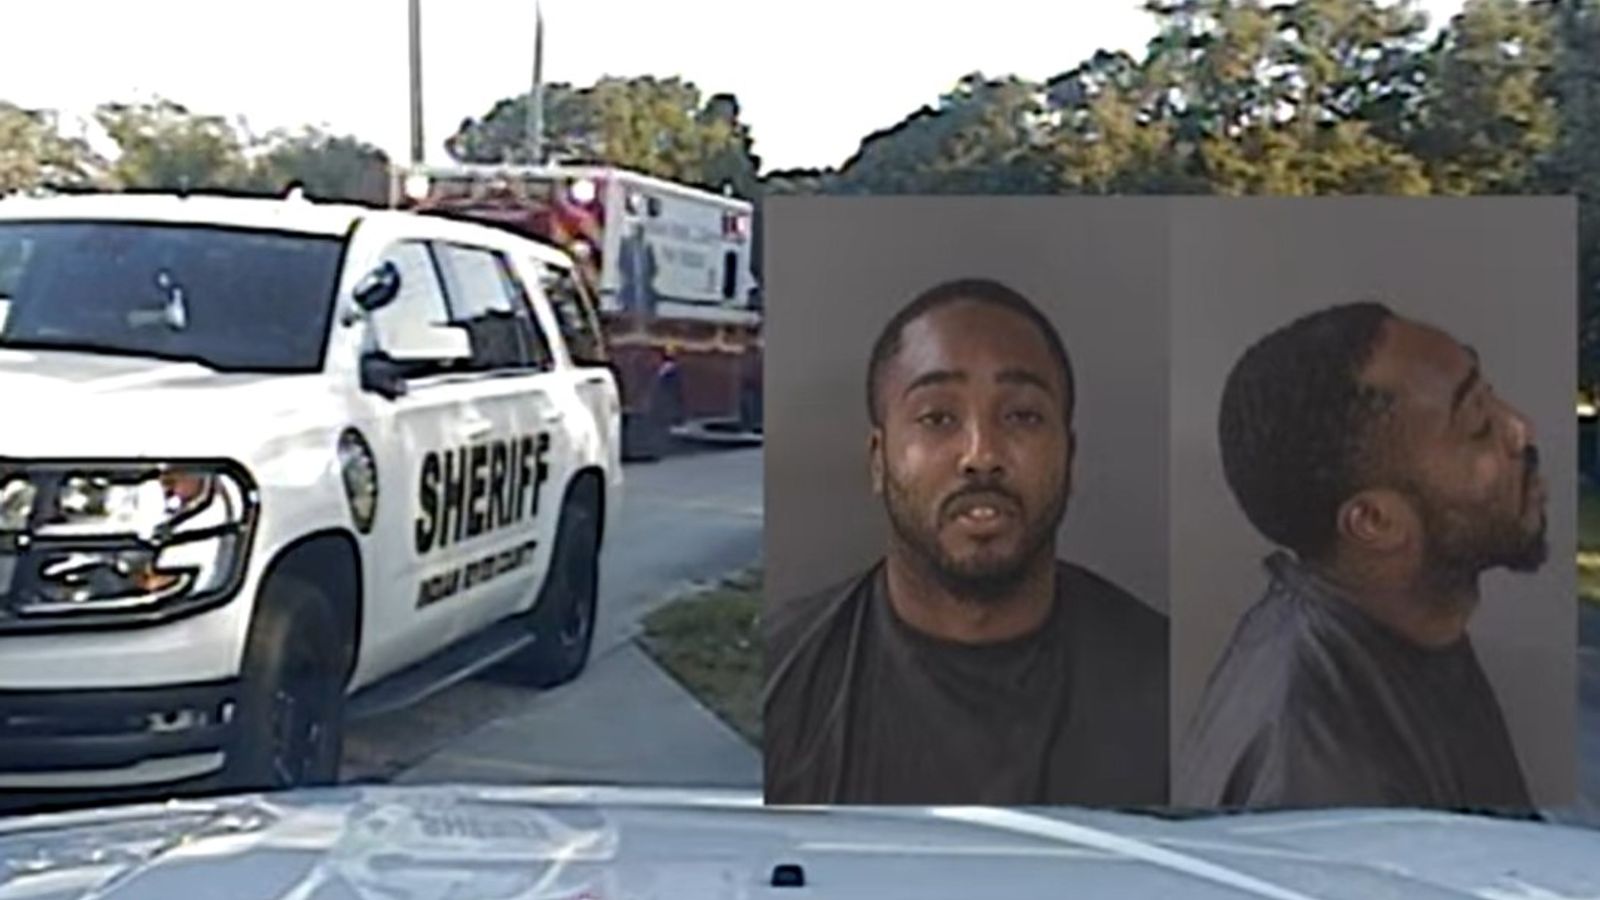 Florida man threw his two-month-old baby at police after high-speed car chase